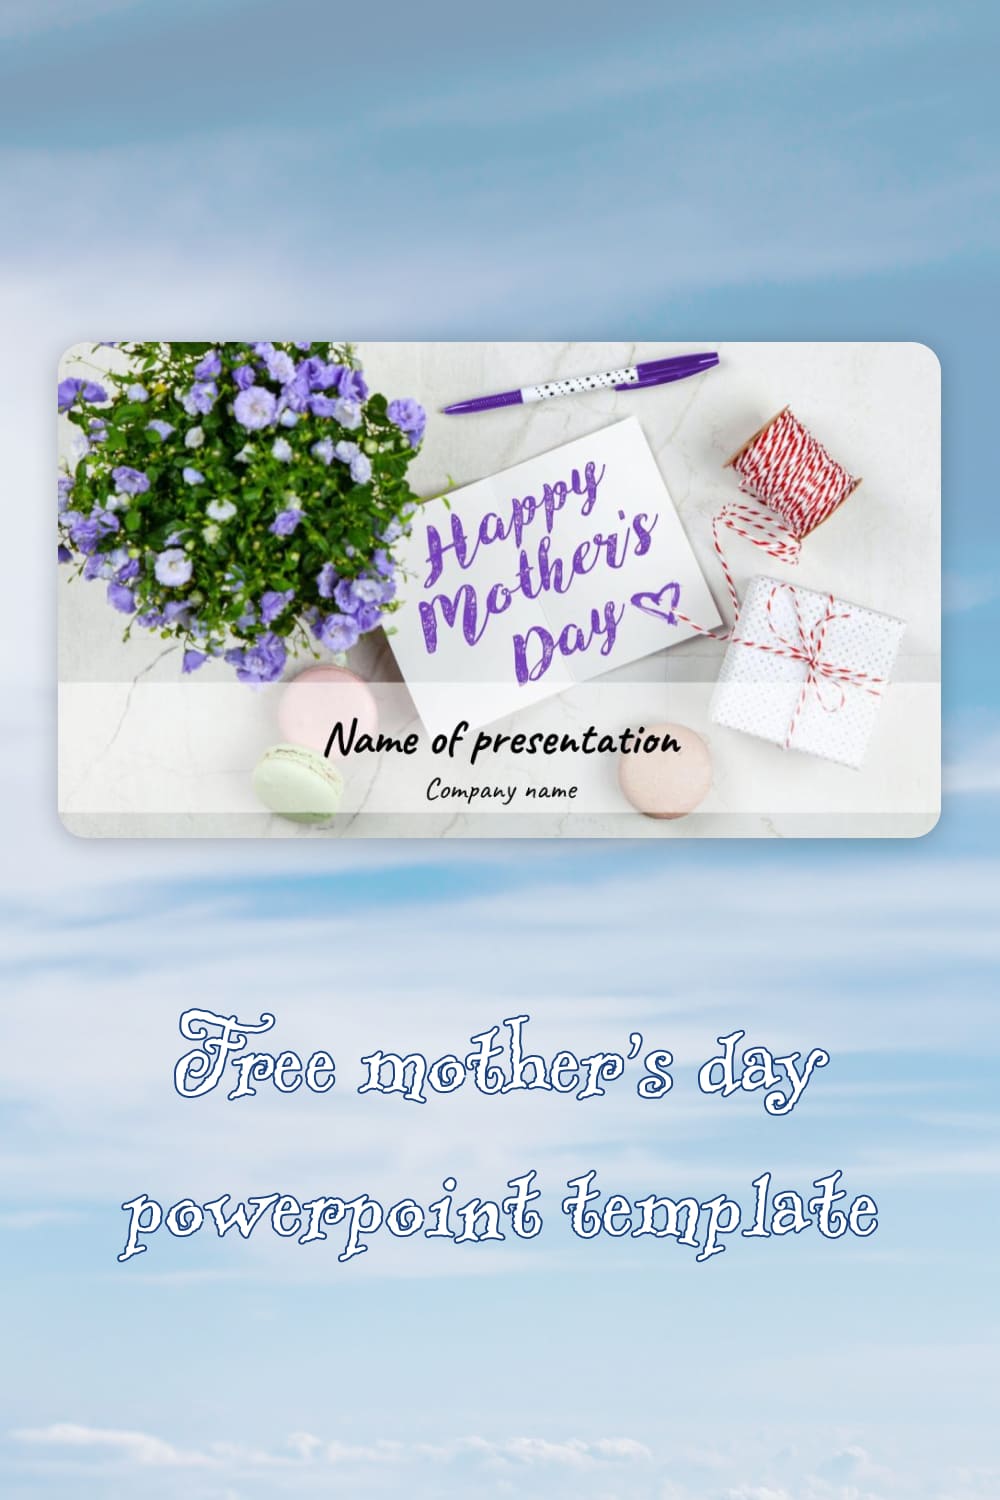 Pinterest Mothers Day Powerpoint Template.